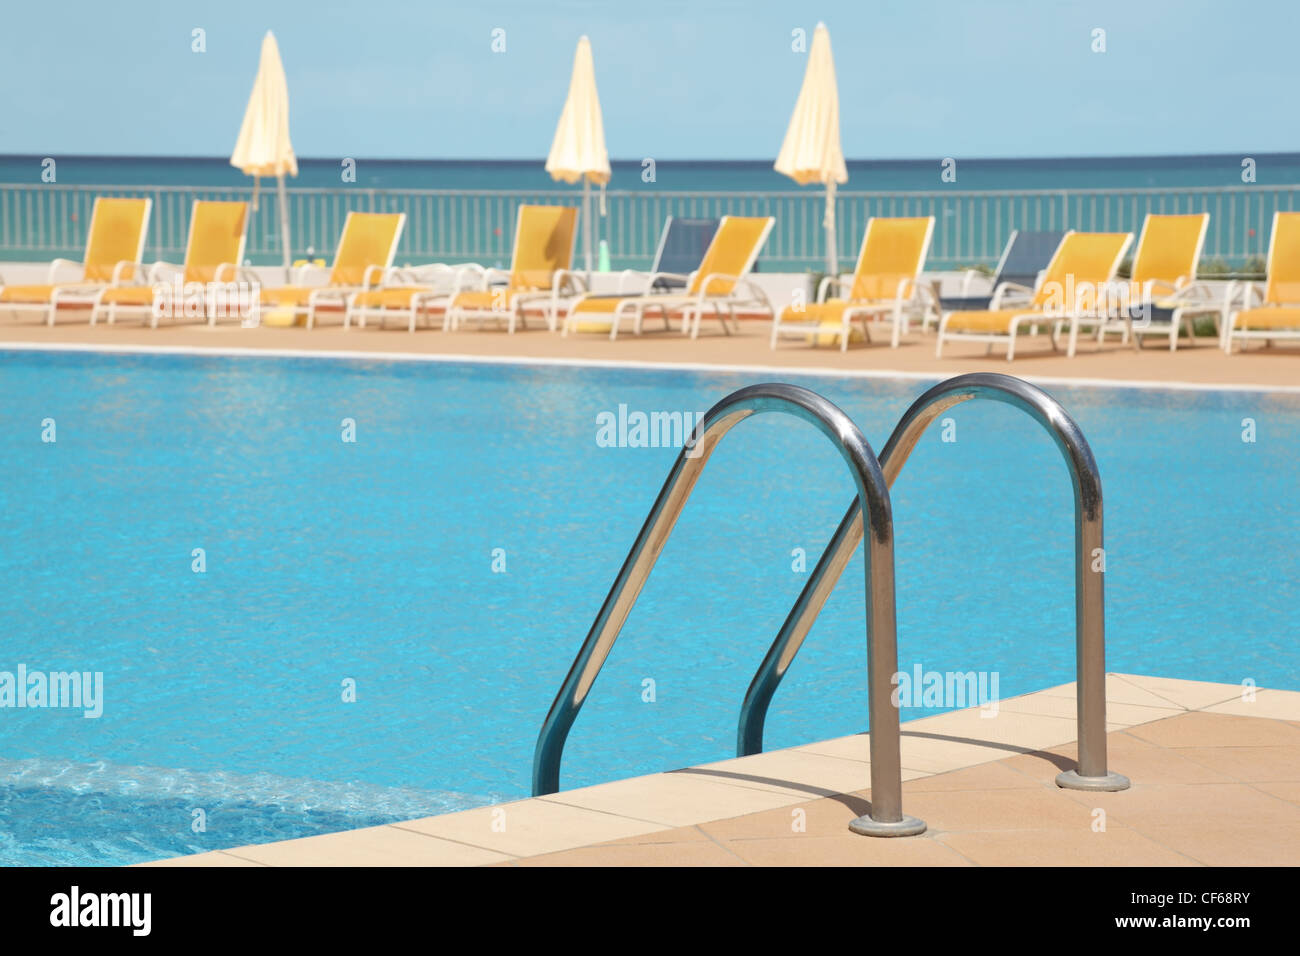 hotel swimming pool with stair, yellow longes and umbrellas Stock Photo